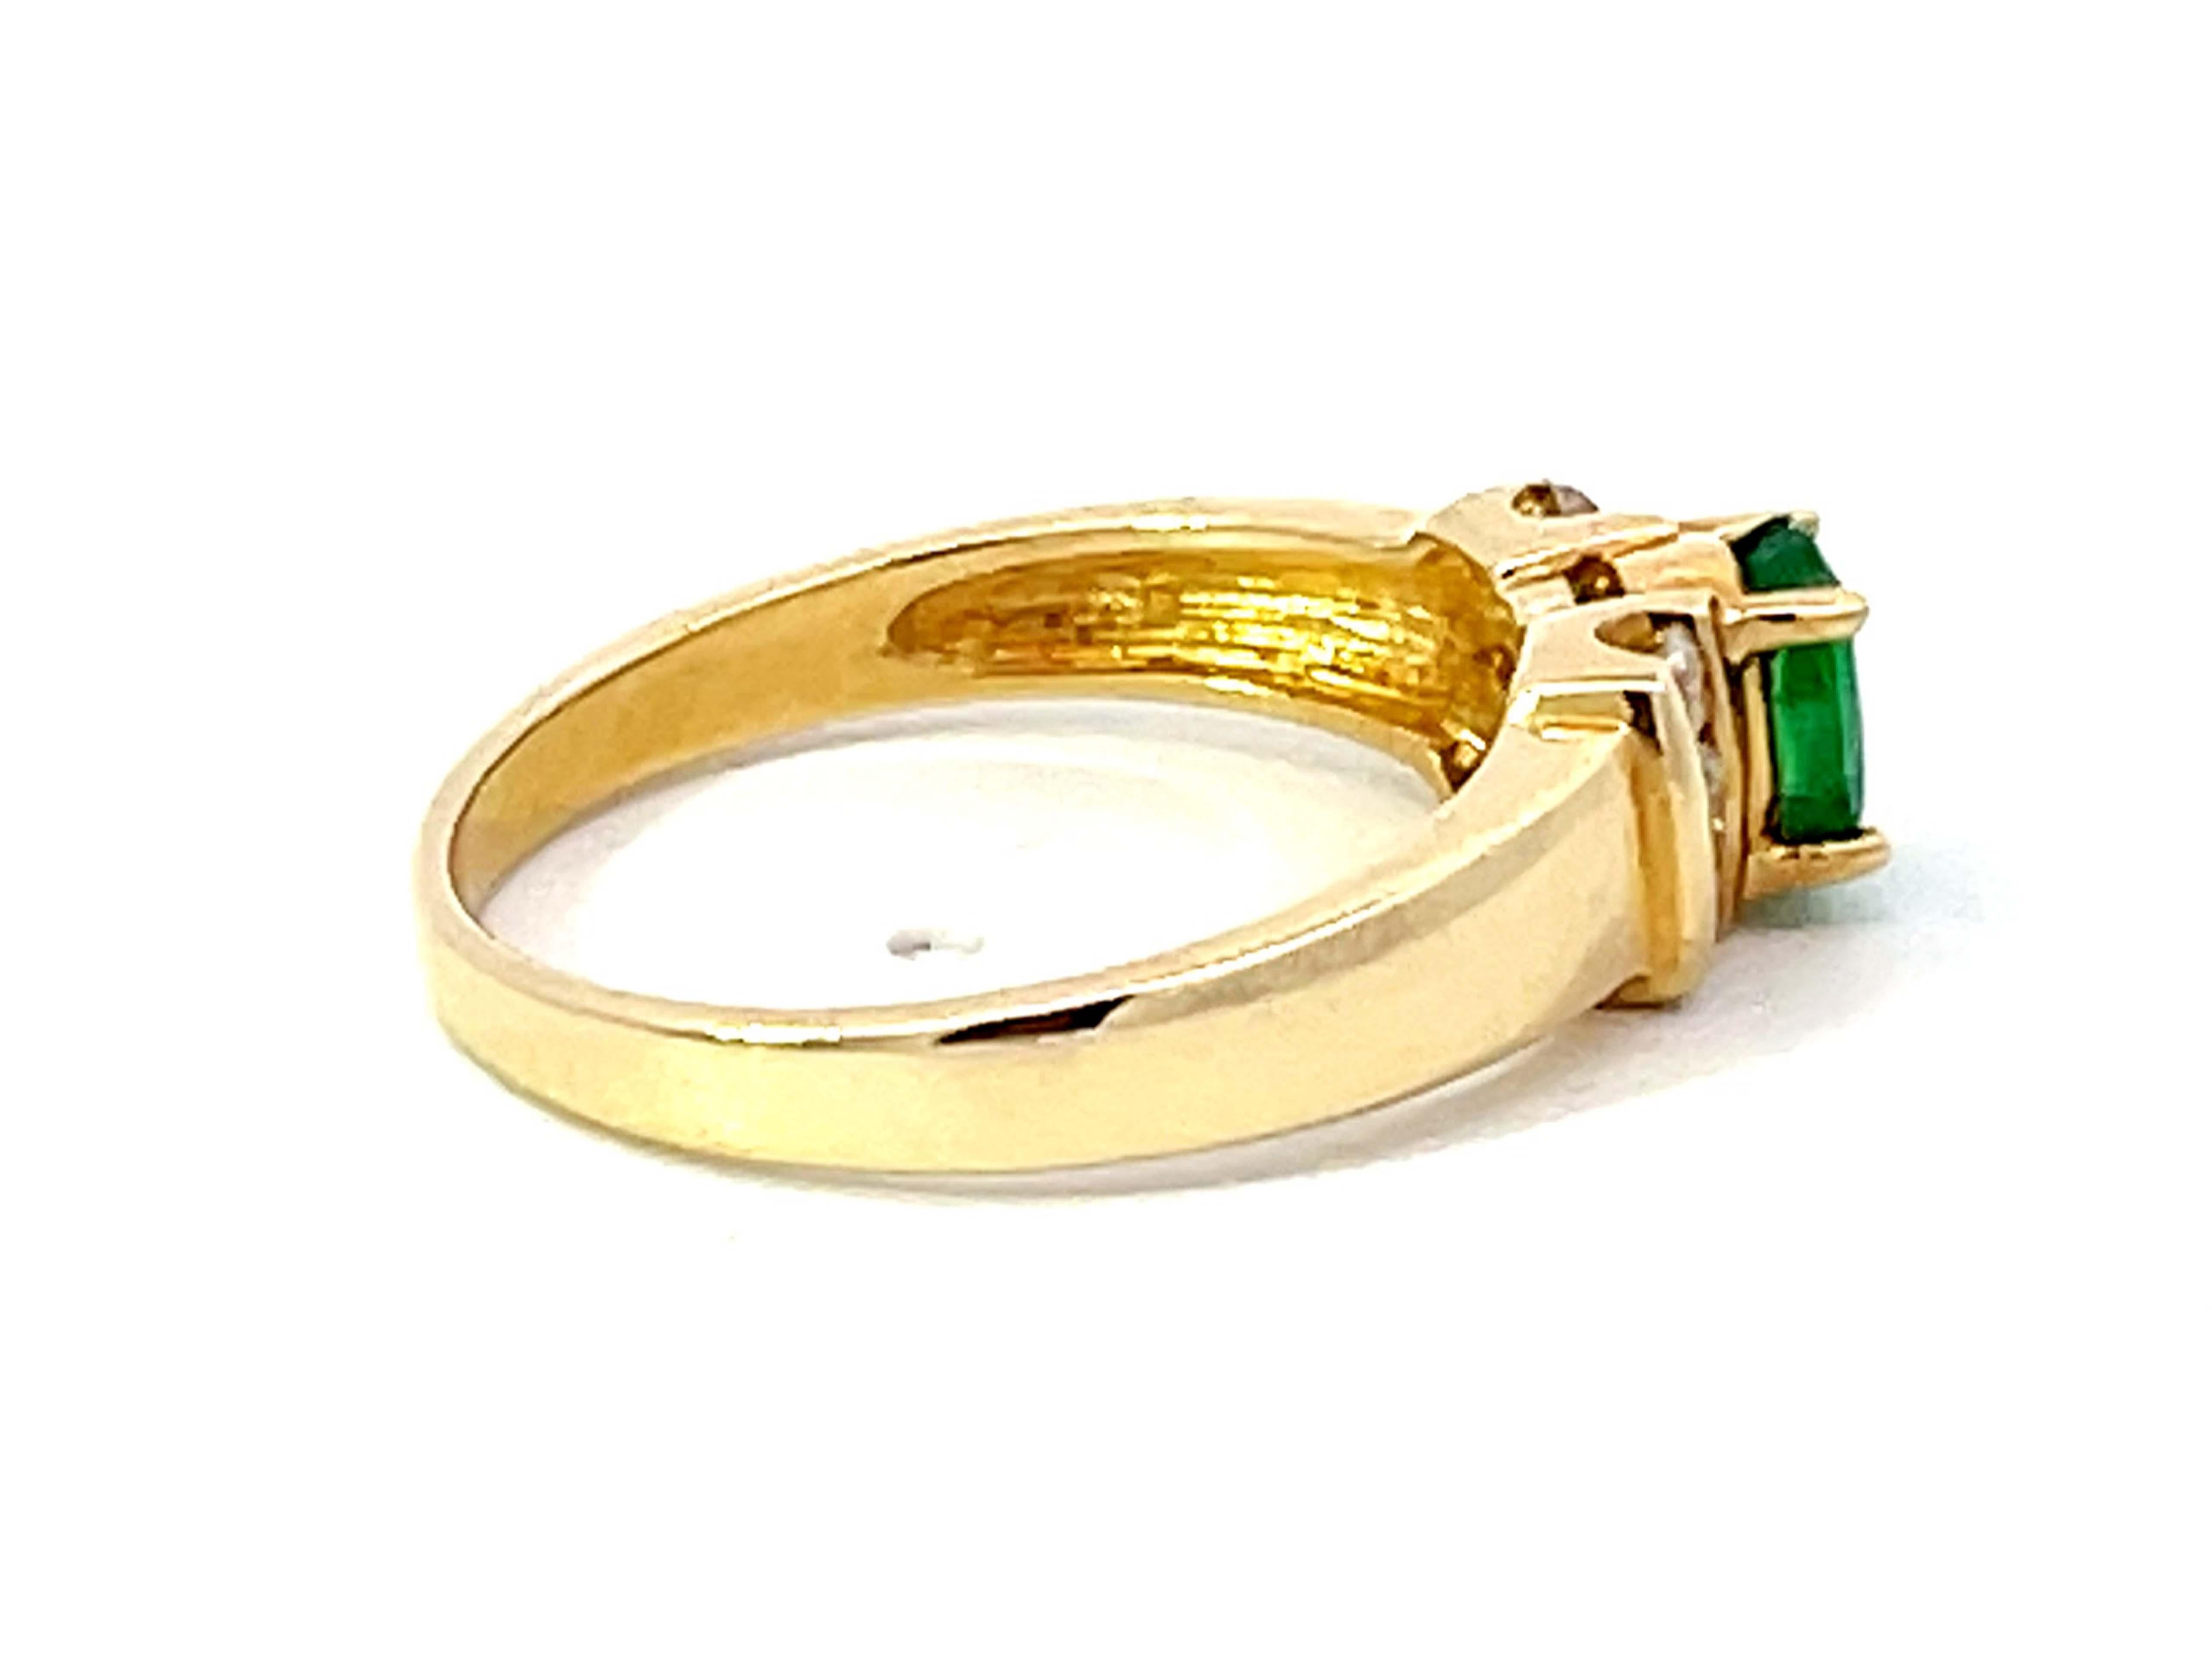 Oval Green Emerald and 6 Diamond Stackable Ring in 14k Yellow Gold In Excellent Condition For Sale In Honolulu, HI